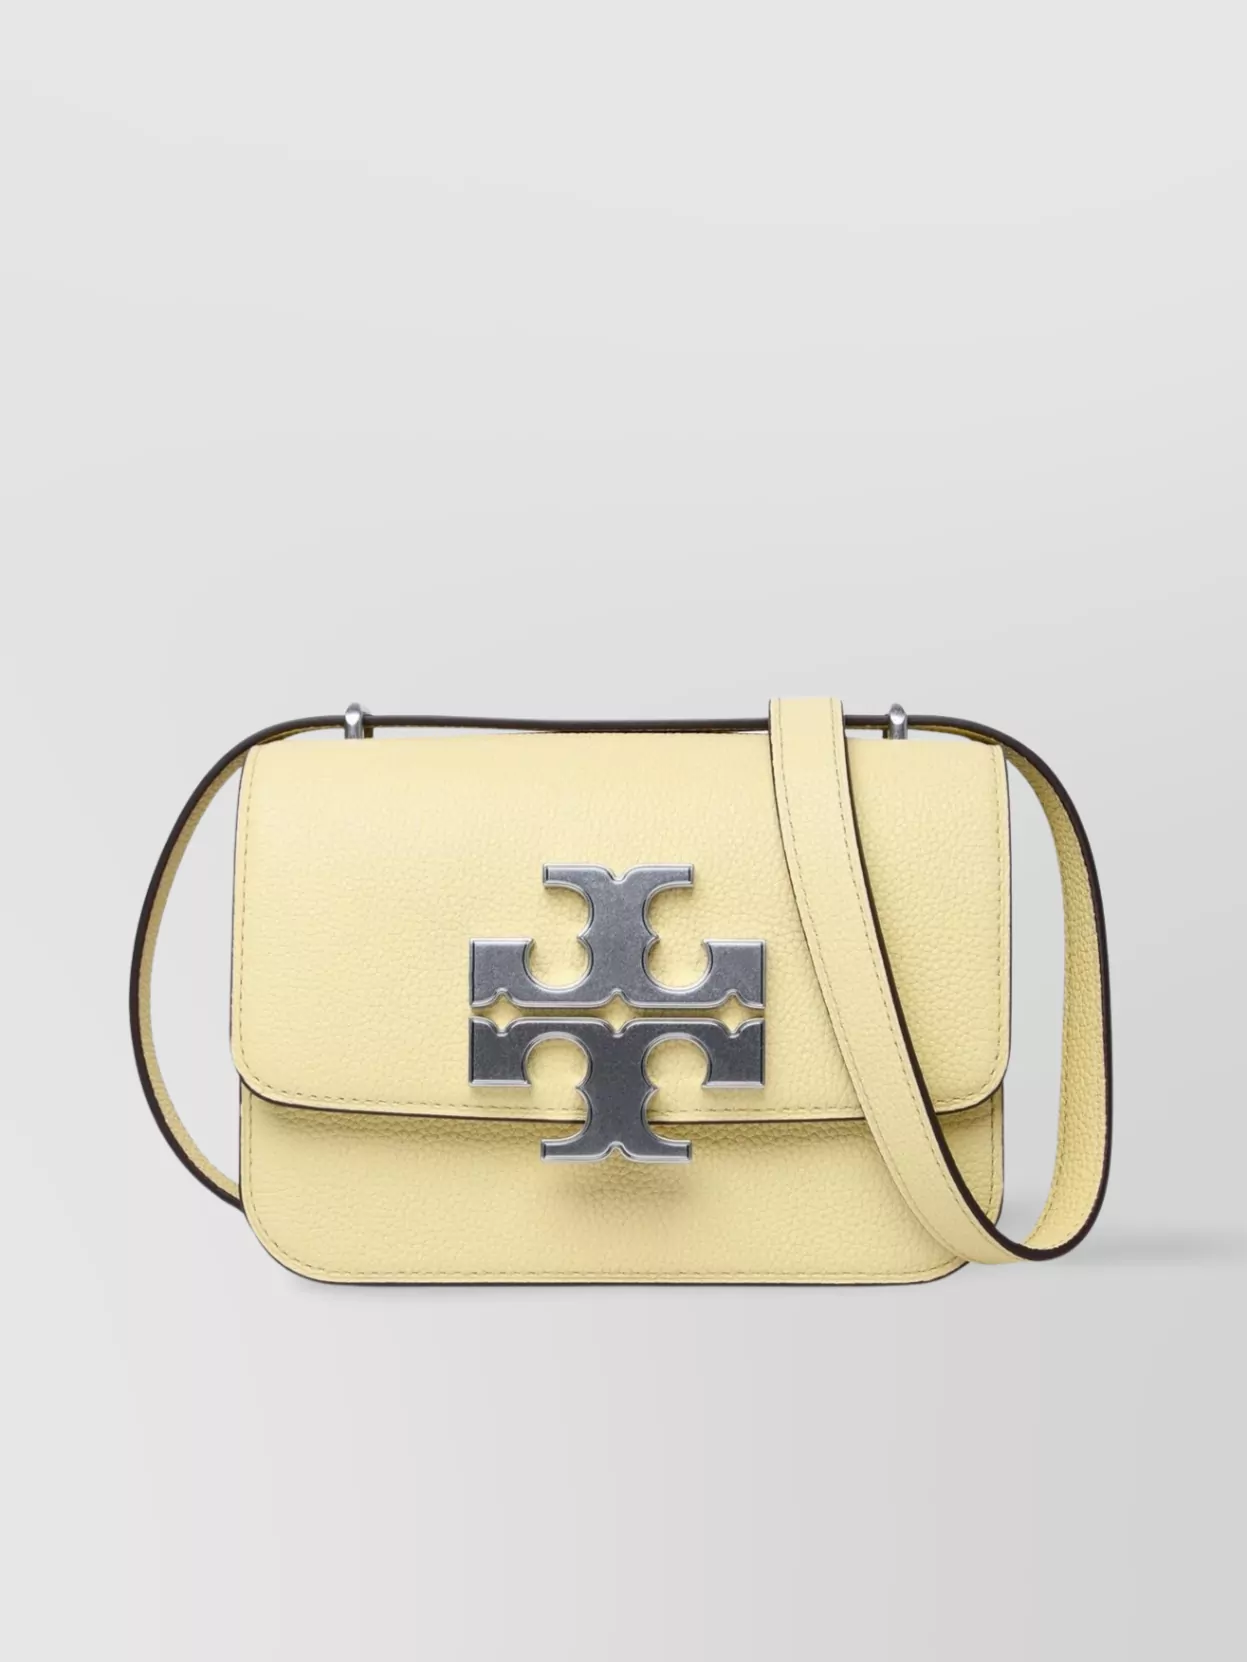 Tory Burch Small 'eleanor' Leather Bag